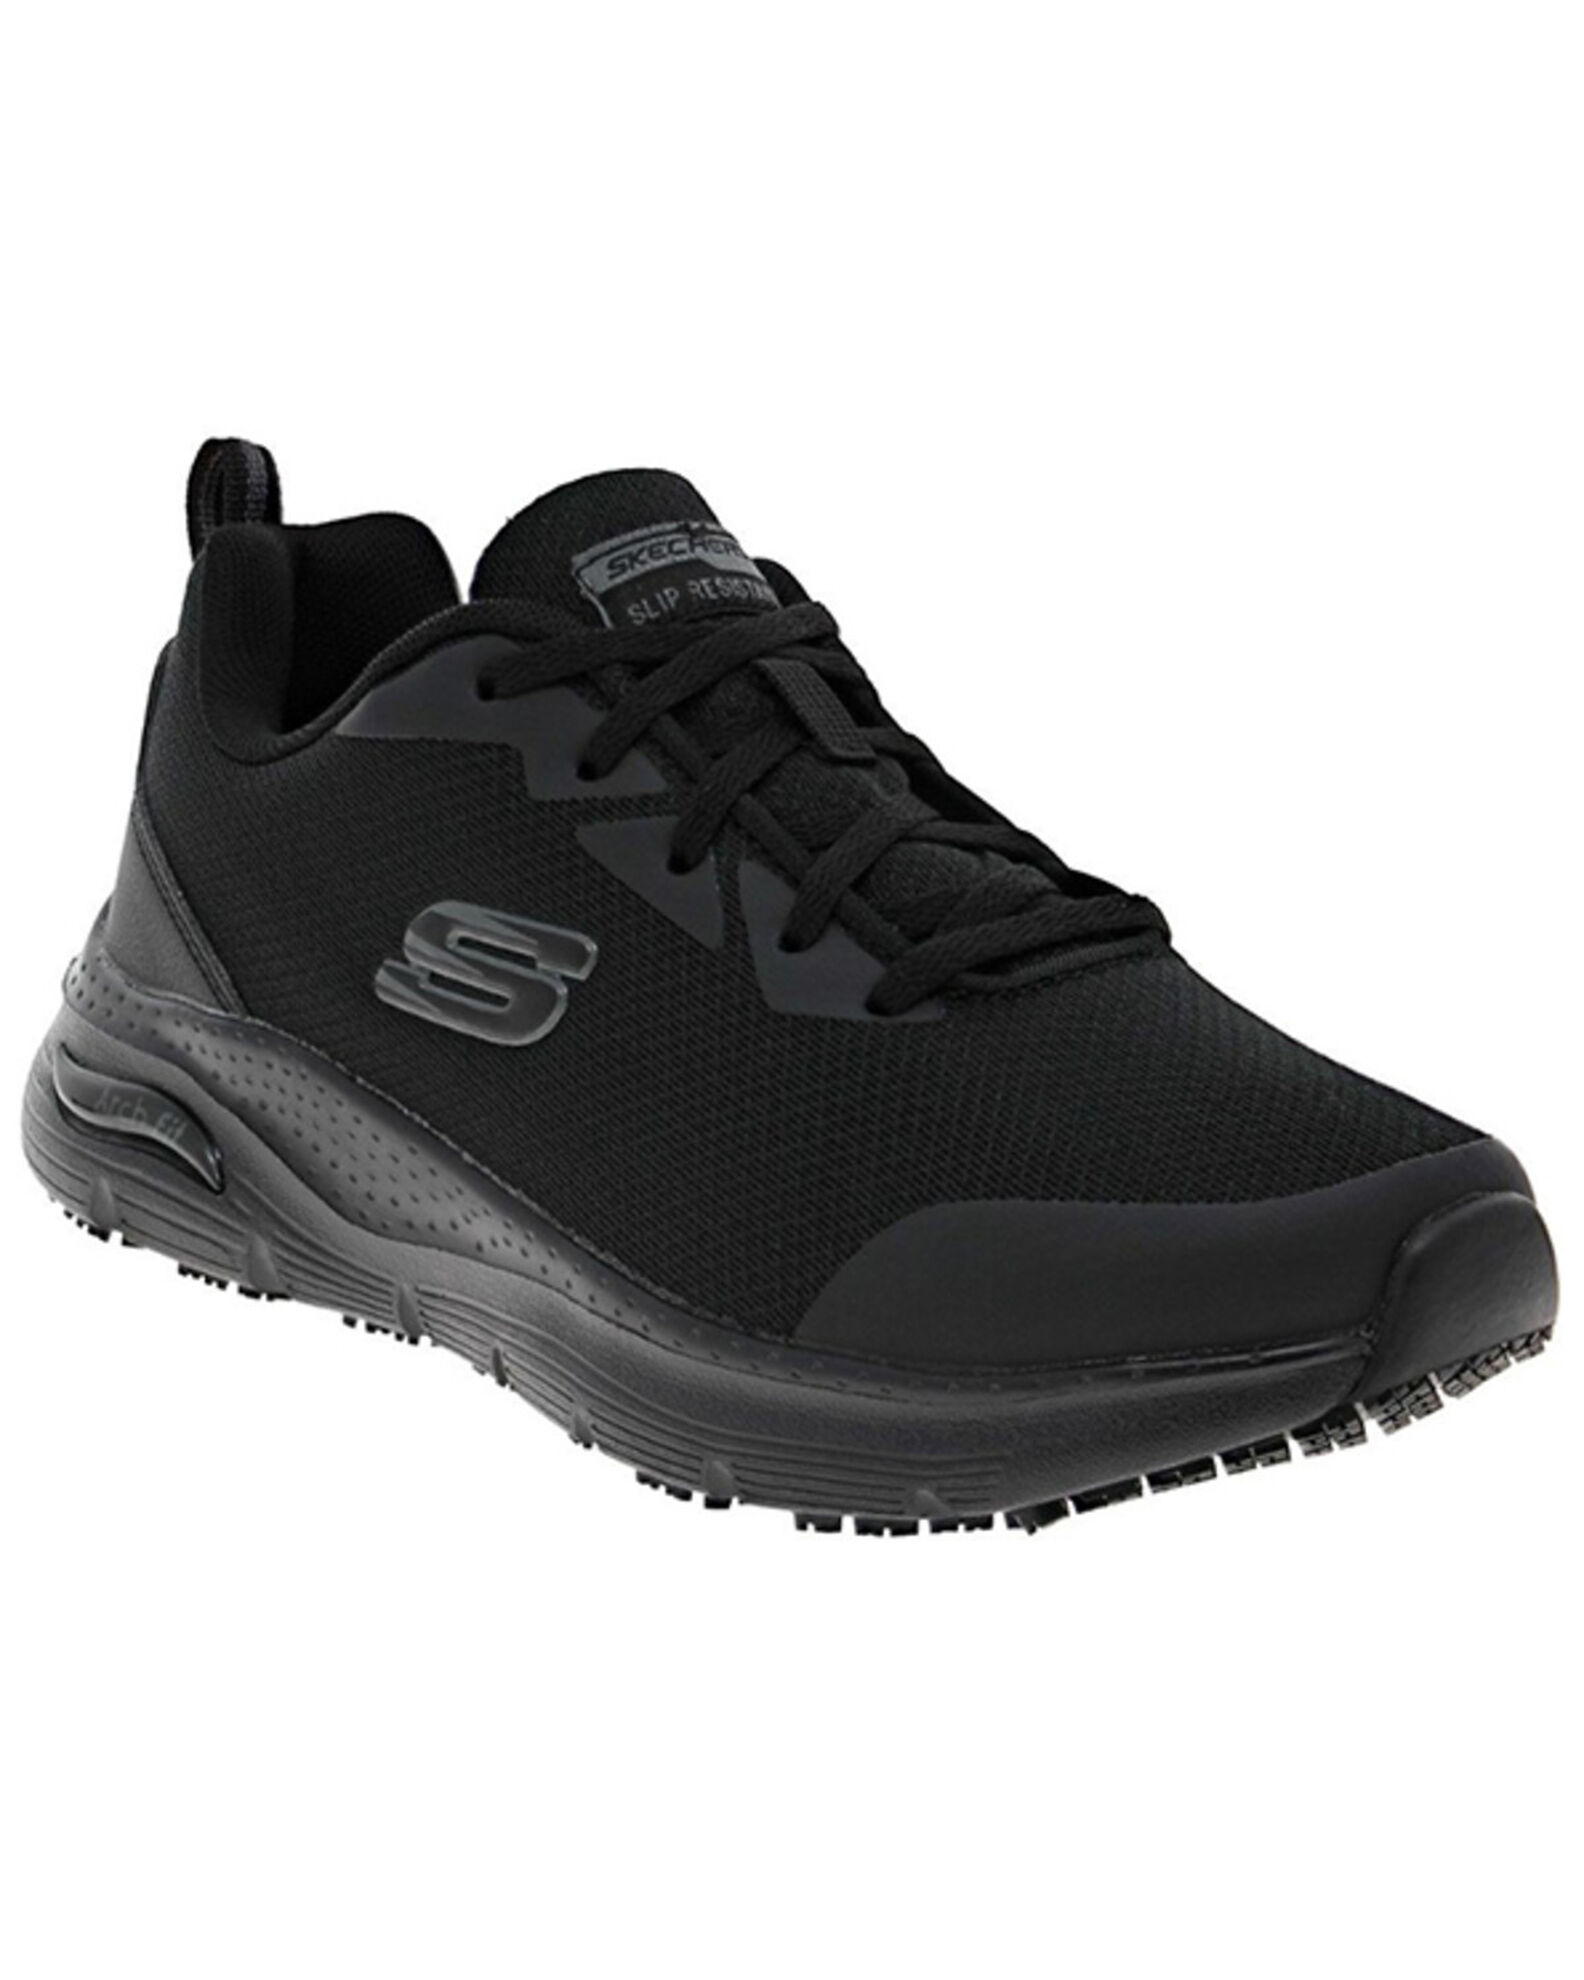 Product Name: Skechers Women's Arch Fit Work Shoes - Round Toe